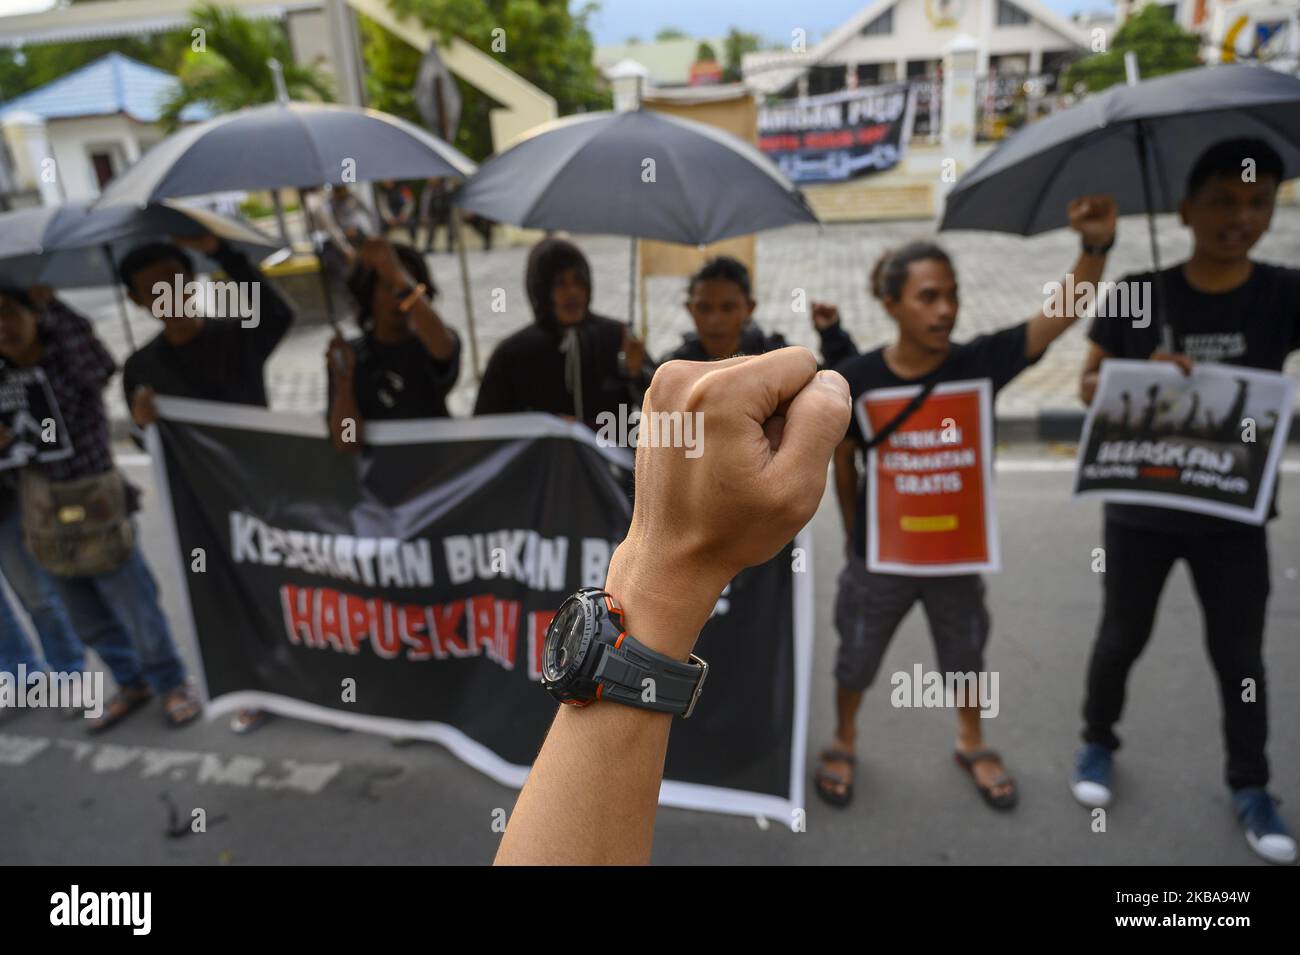 Humanitarian activists carry banners at the Kamisan Action in front of the Central Sulawesi House of Representatives Office in Palu, Central Sulawesi, Indonesia on November 7, 2019. The 16th Kamisan Action this time carries the theme of health and demands to the government so that the state can attend to any public health issues and reject the increase in health insurance contributions managed by the state because they are considered burdening the people. (Photo by Basri Marzuki/NurPhoto) Stock Photo